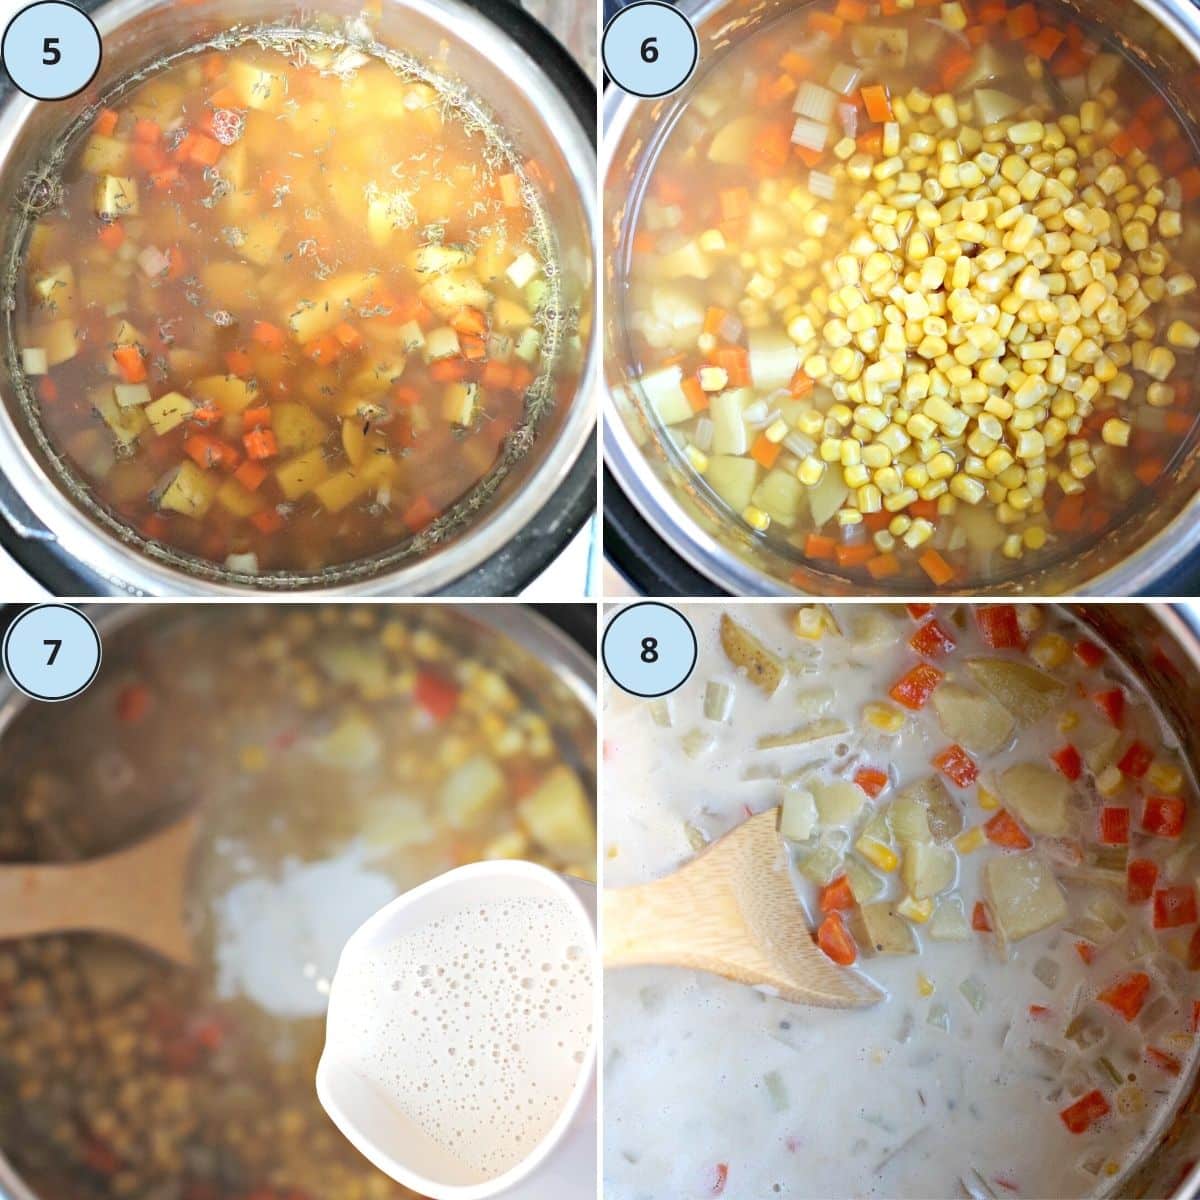 Collage of images showing steps 5 through 8 for making this recipe